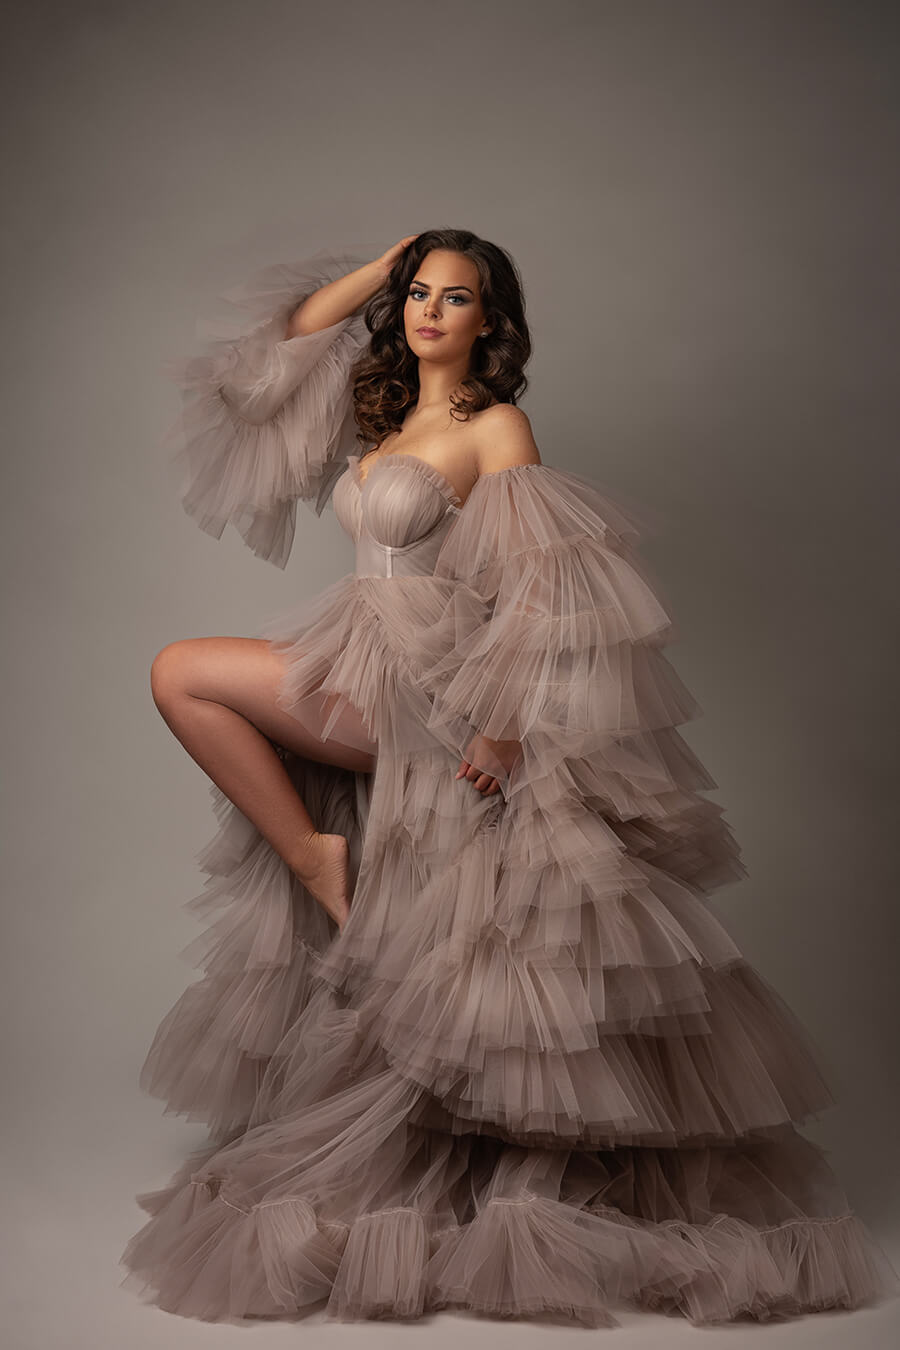 brunette model poses in a studio wearing a large tulle dress in sand color. there is a split on the skirt, and a lot of tulle in the sleeves.